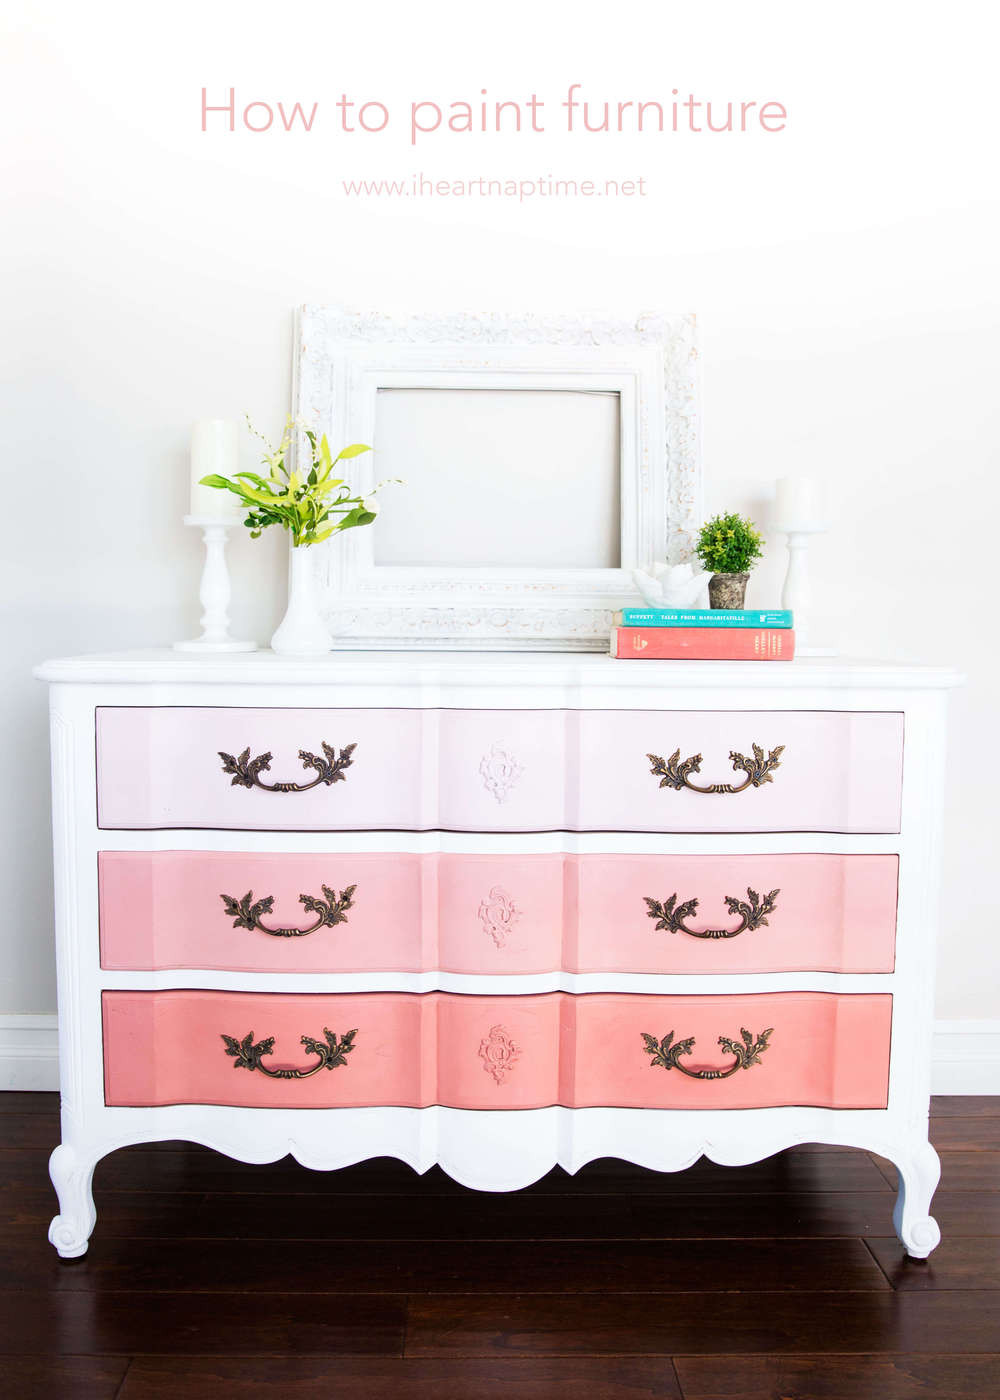 DIY Paint Wood Furniture
 How to Paint Furniture and Ombre Dresser I Heart Nap Time